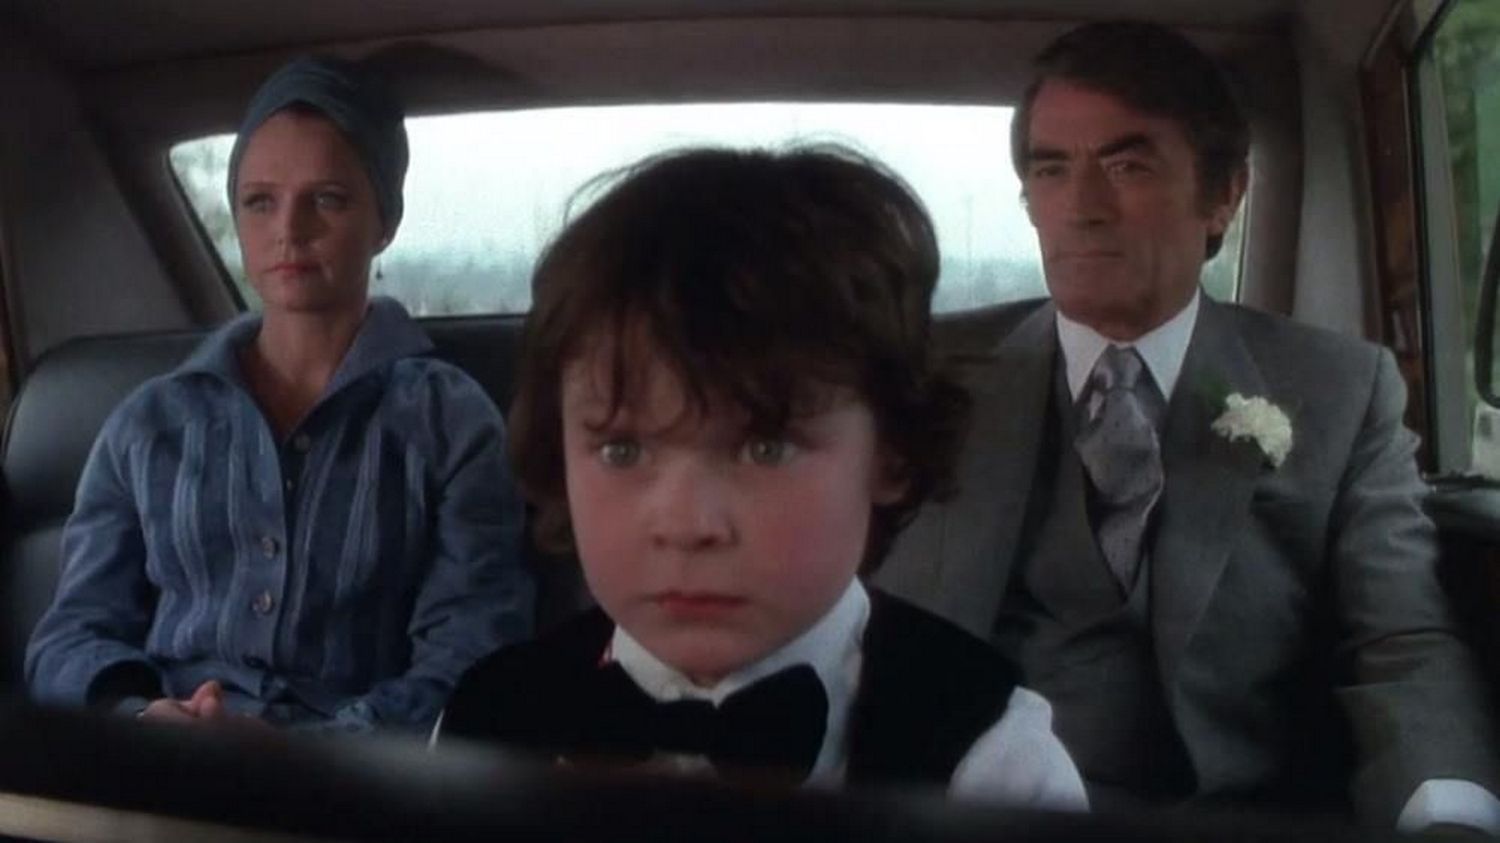 the omen remick stephens peck